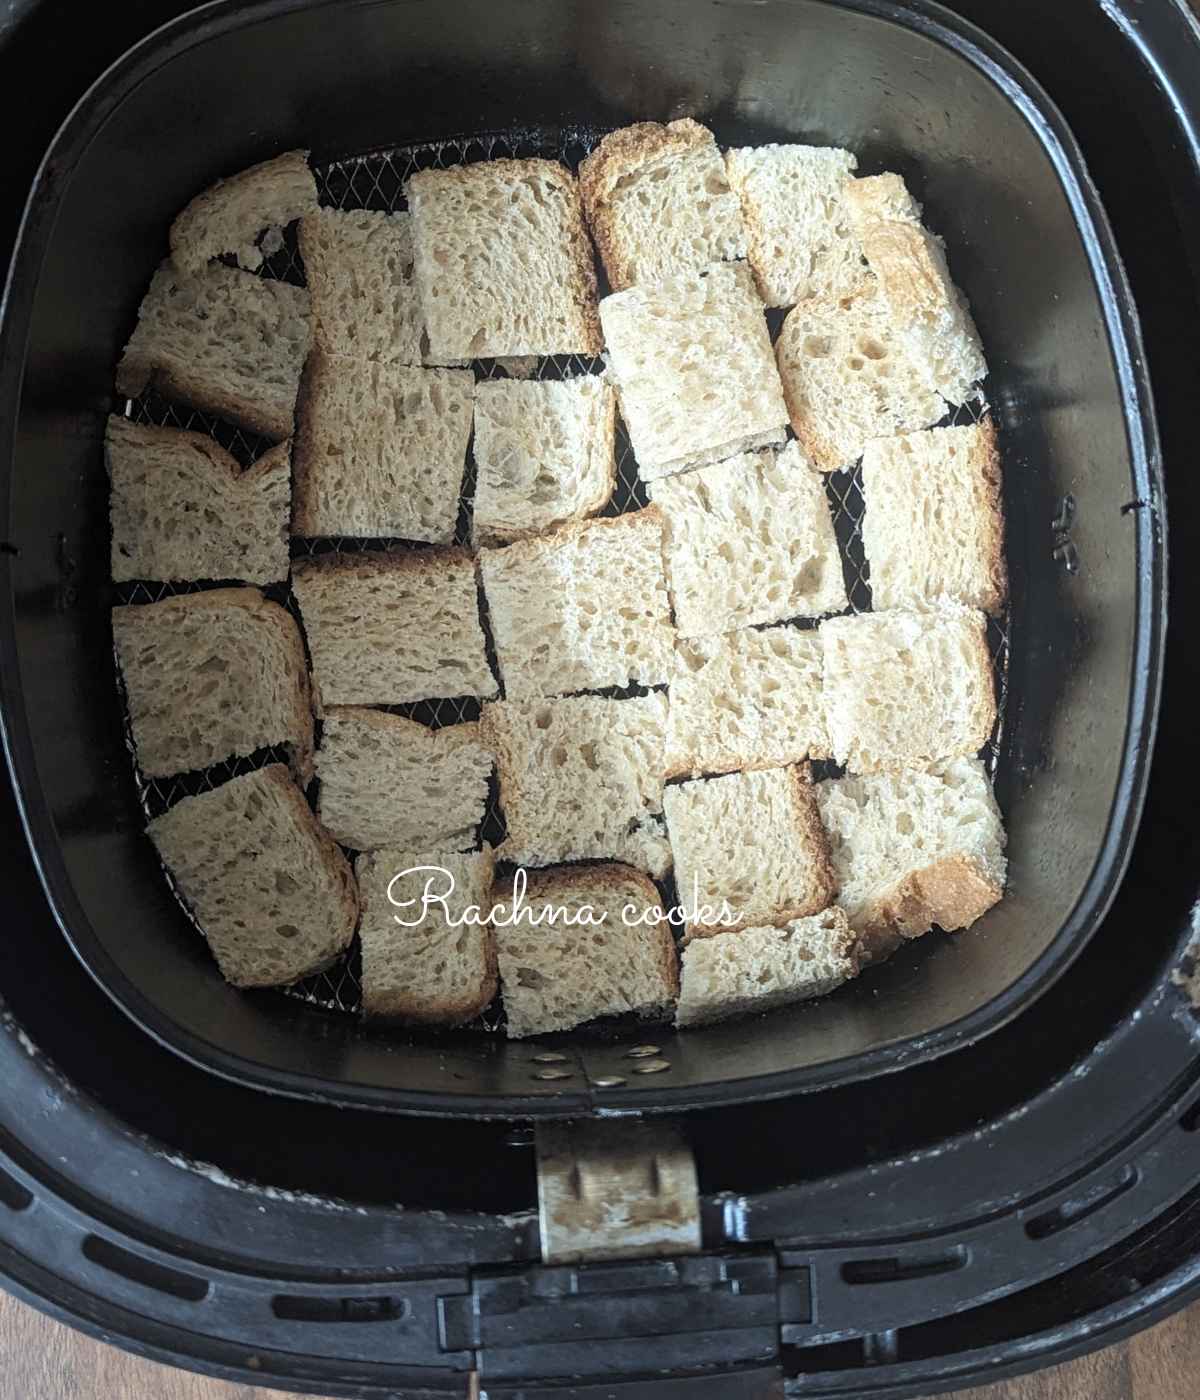 Bread cubes laid in air fryer basket for air frying.